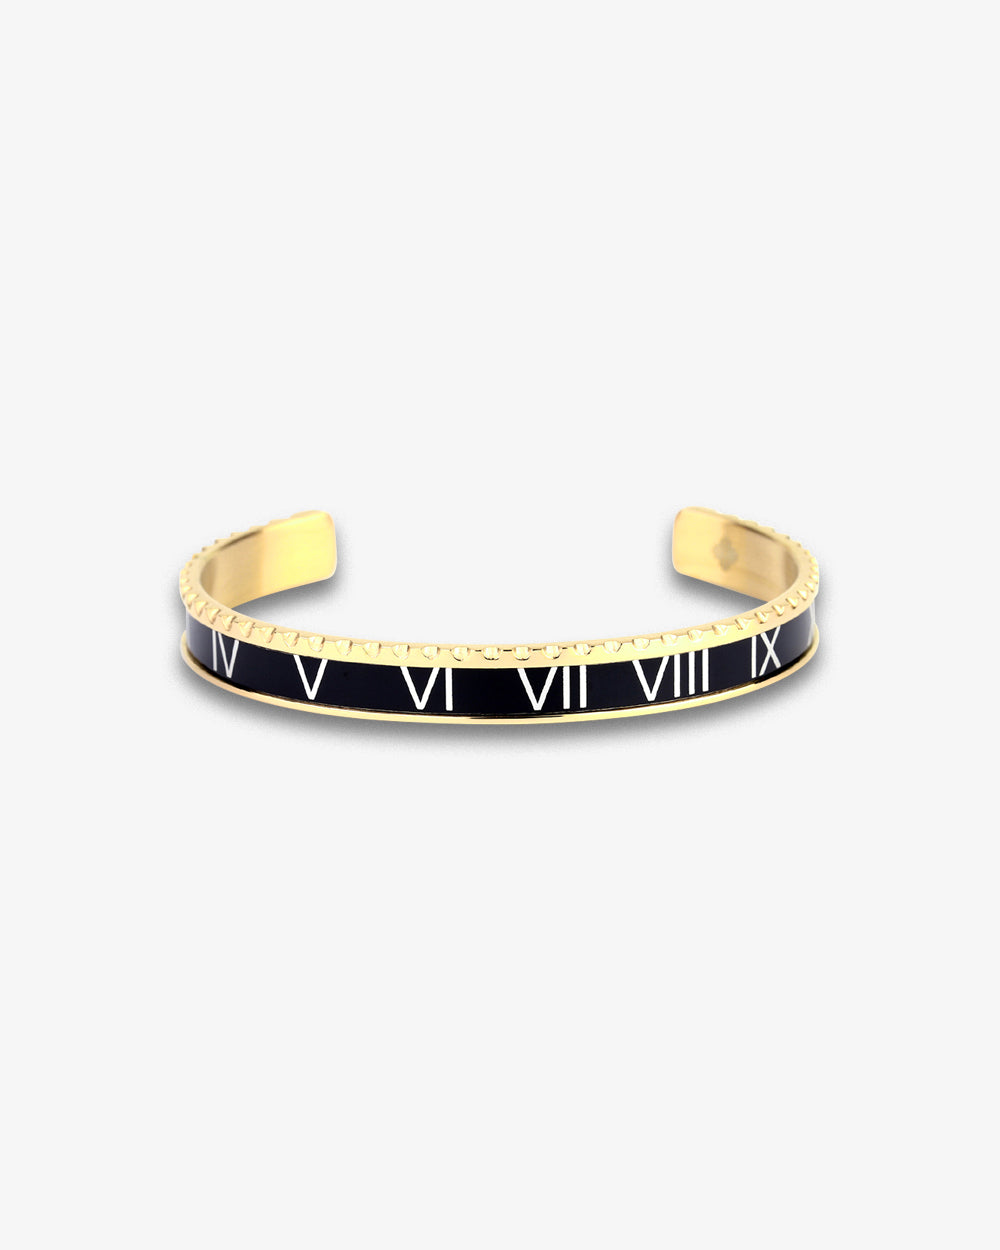 Swiss Concept Classic Roman Numeral Speed Bracelet (Black & Yellow Gold) - Stainless Steel